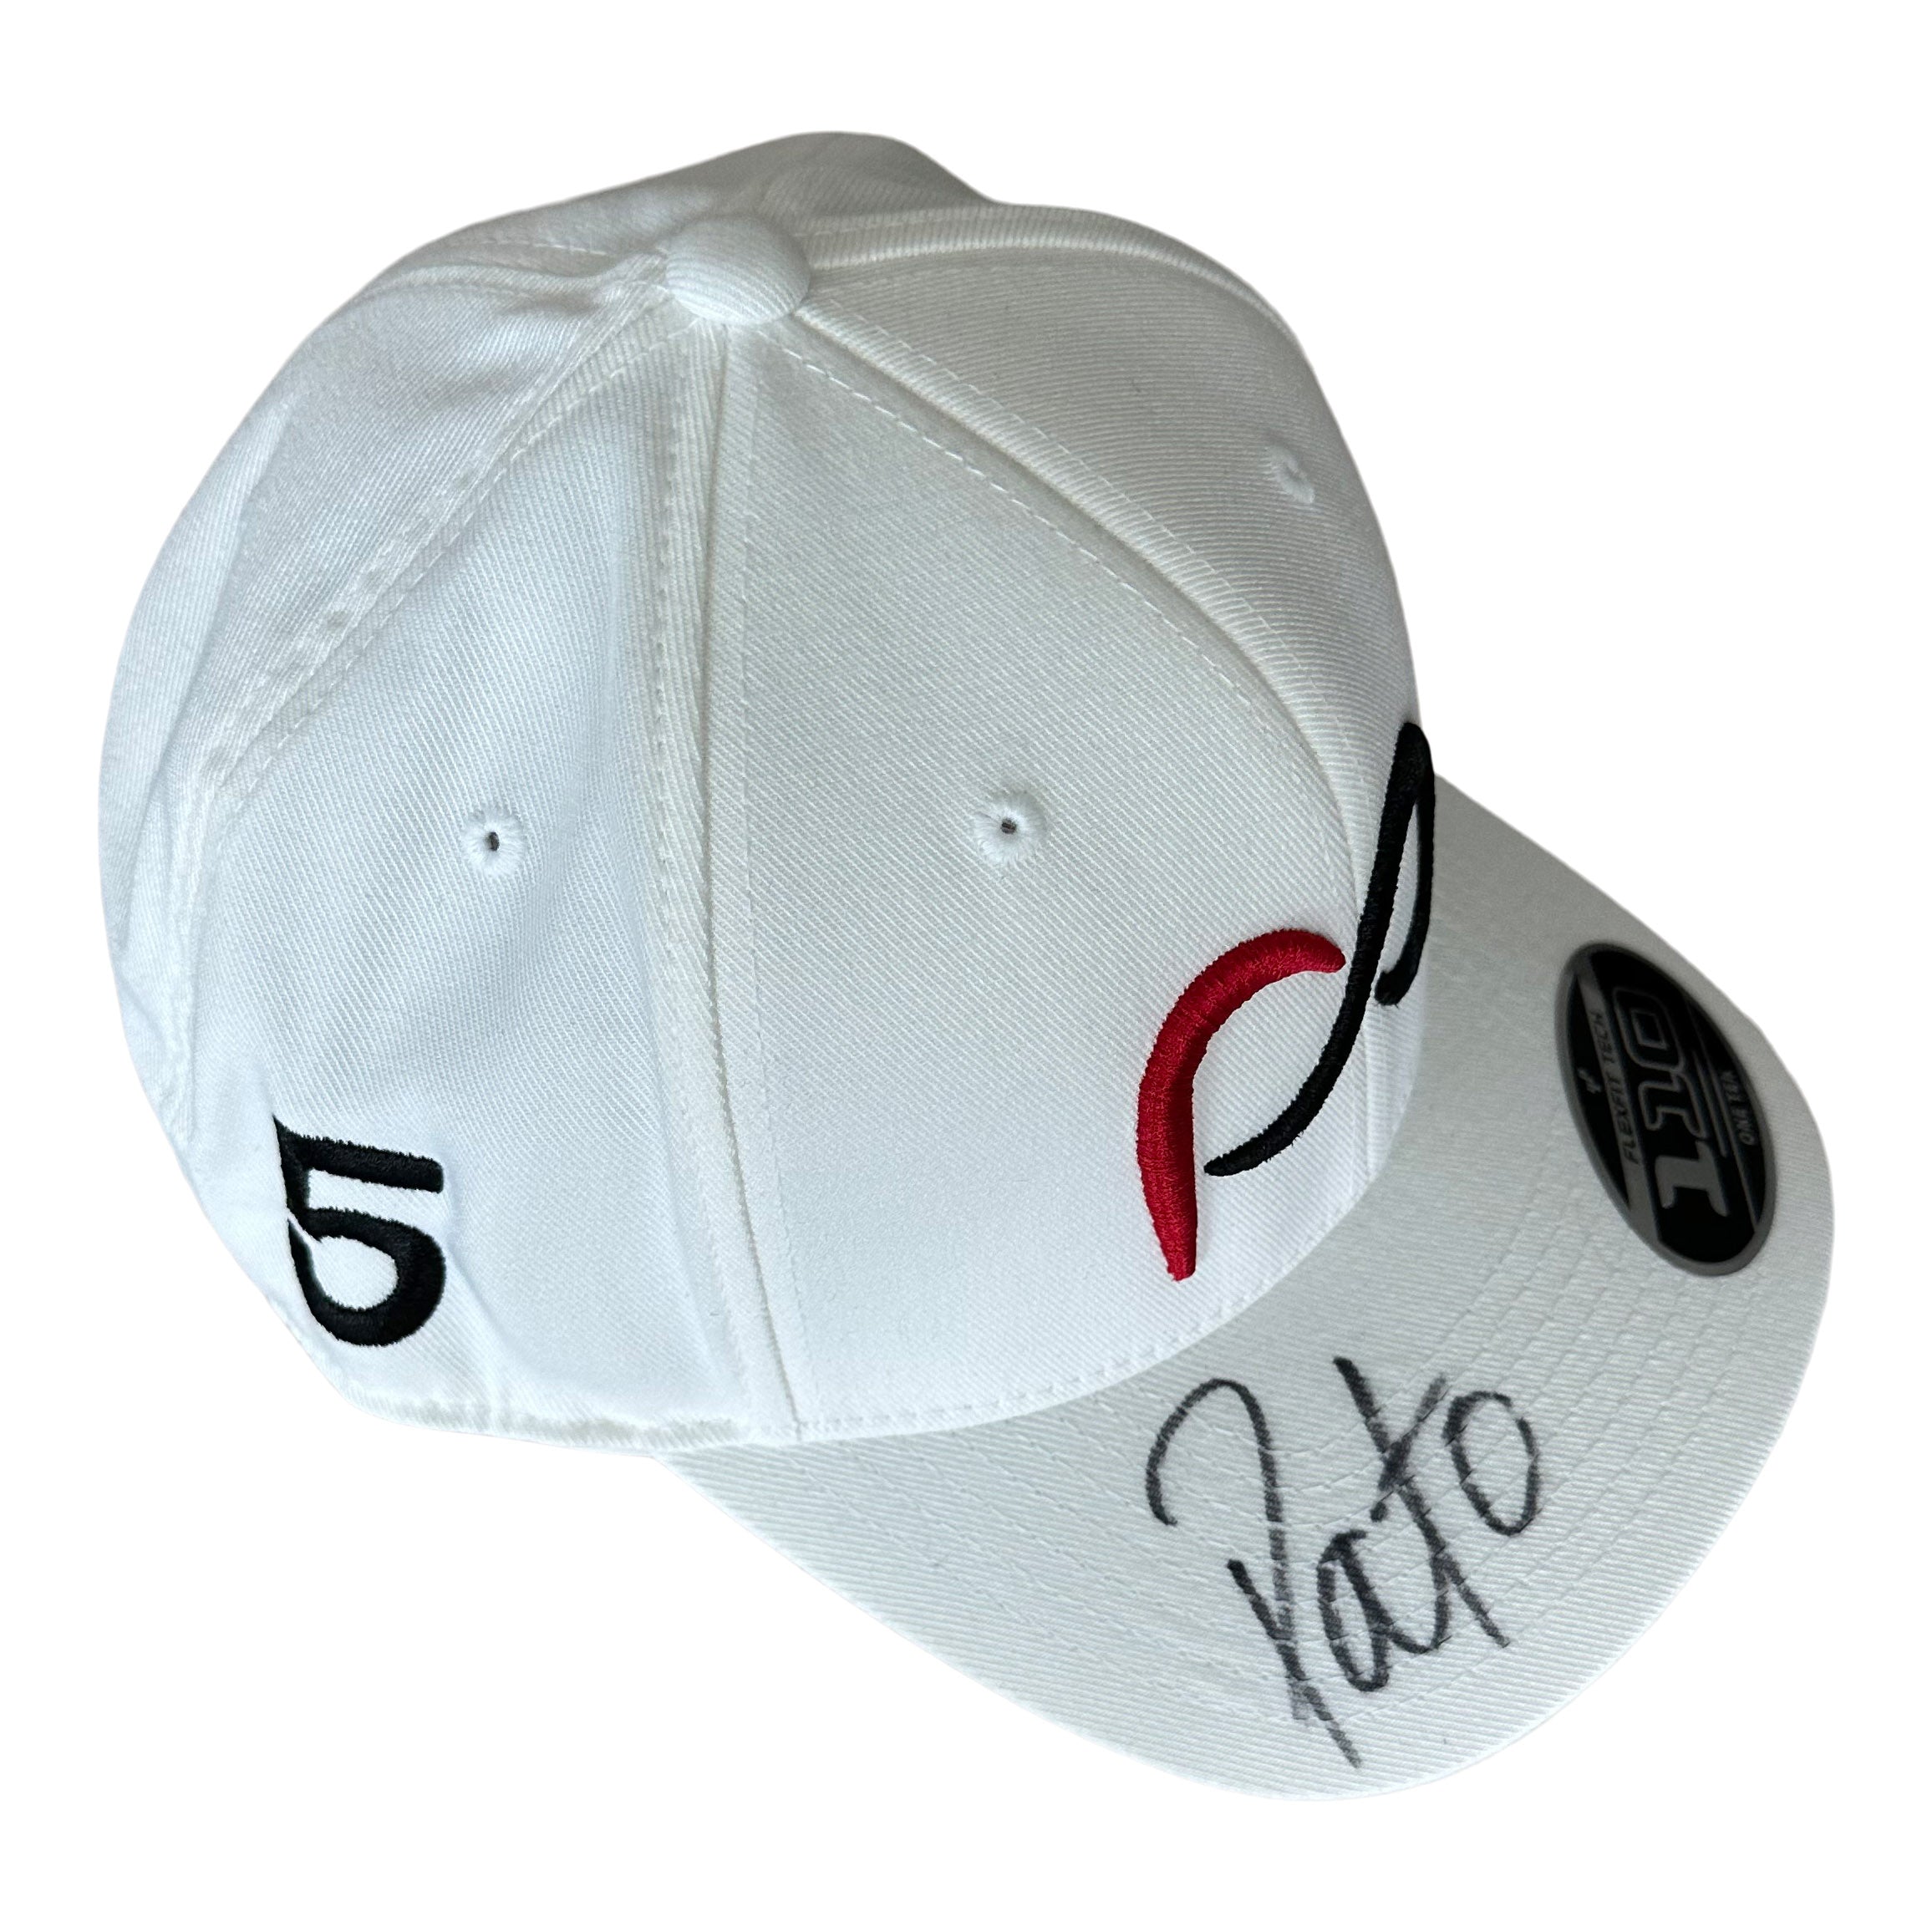 *Autographed* White Curve Bill Cap with PO logo 3D in front and #5 black on side